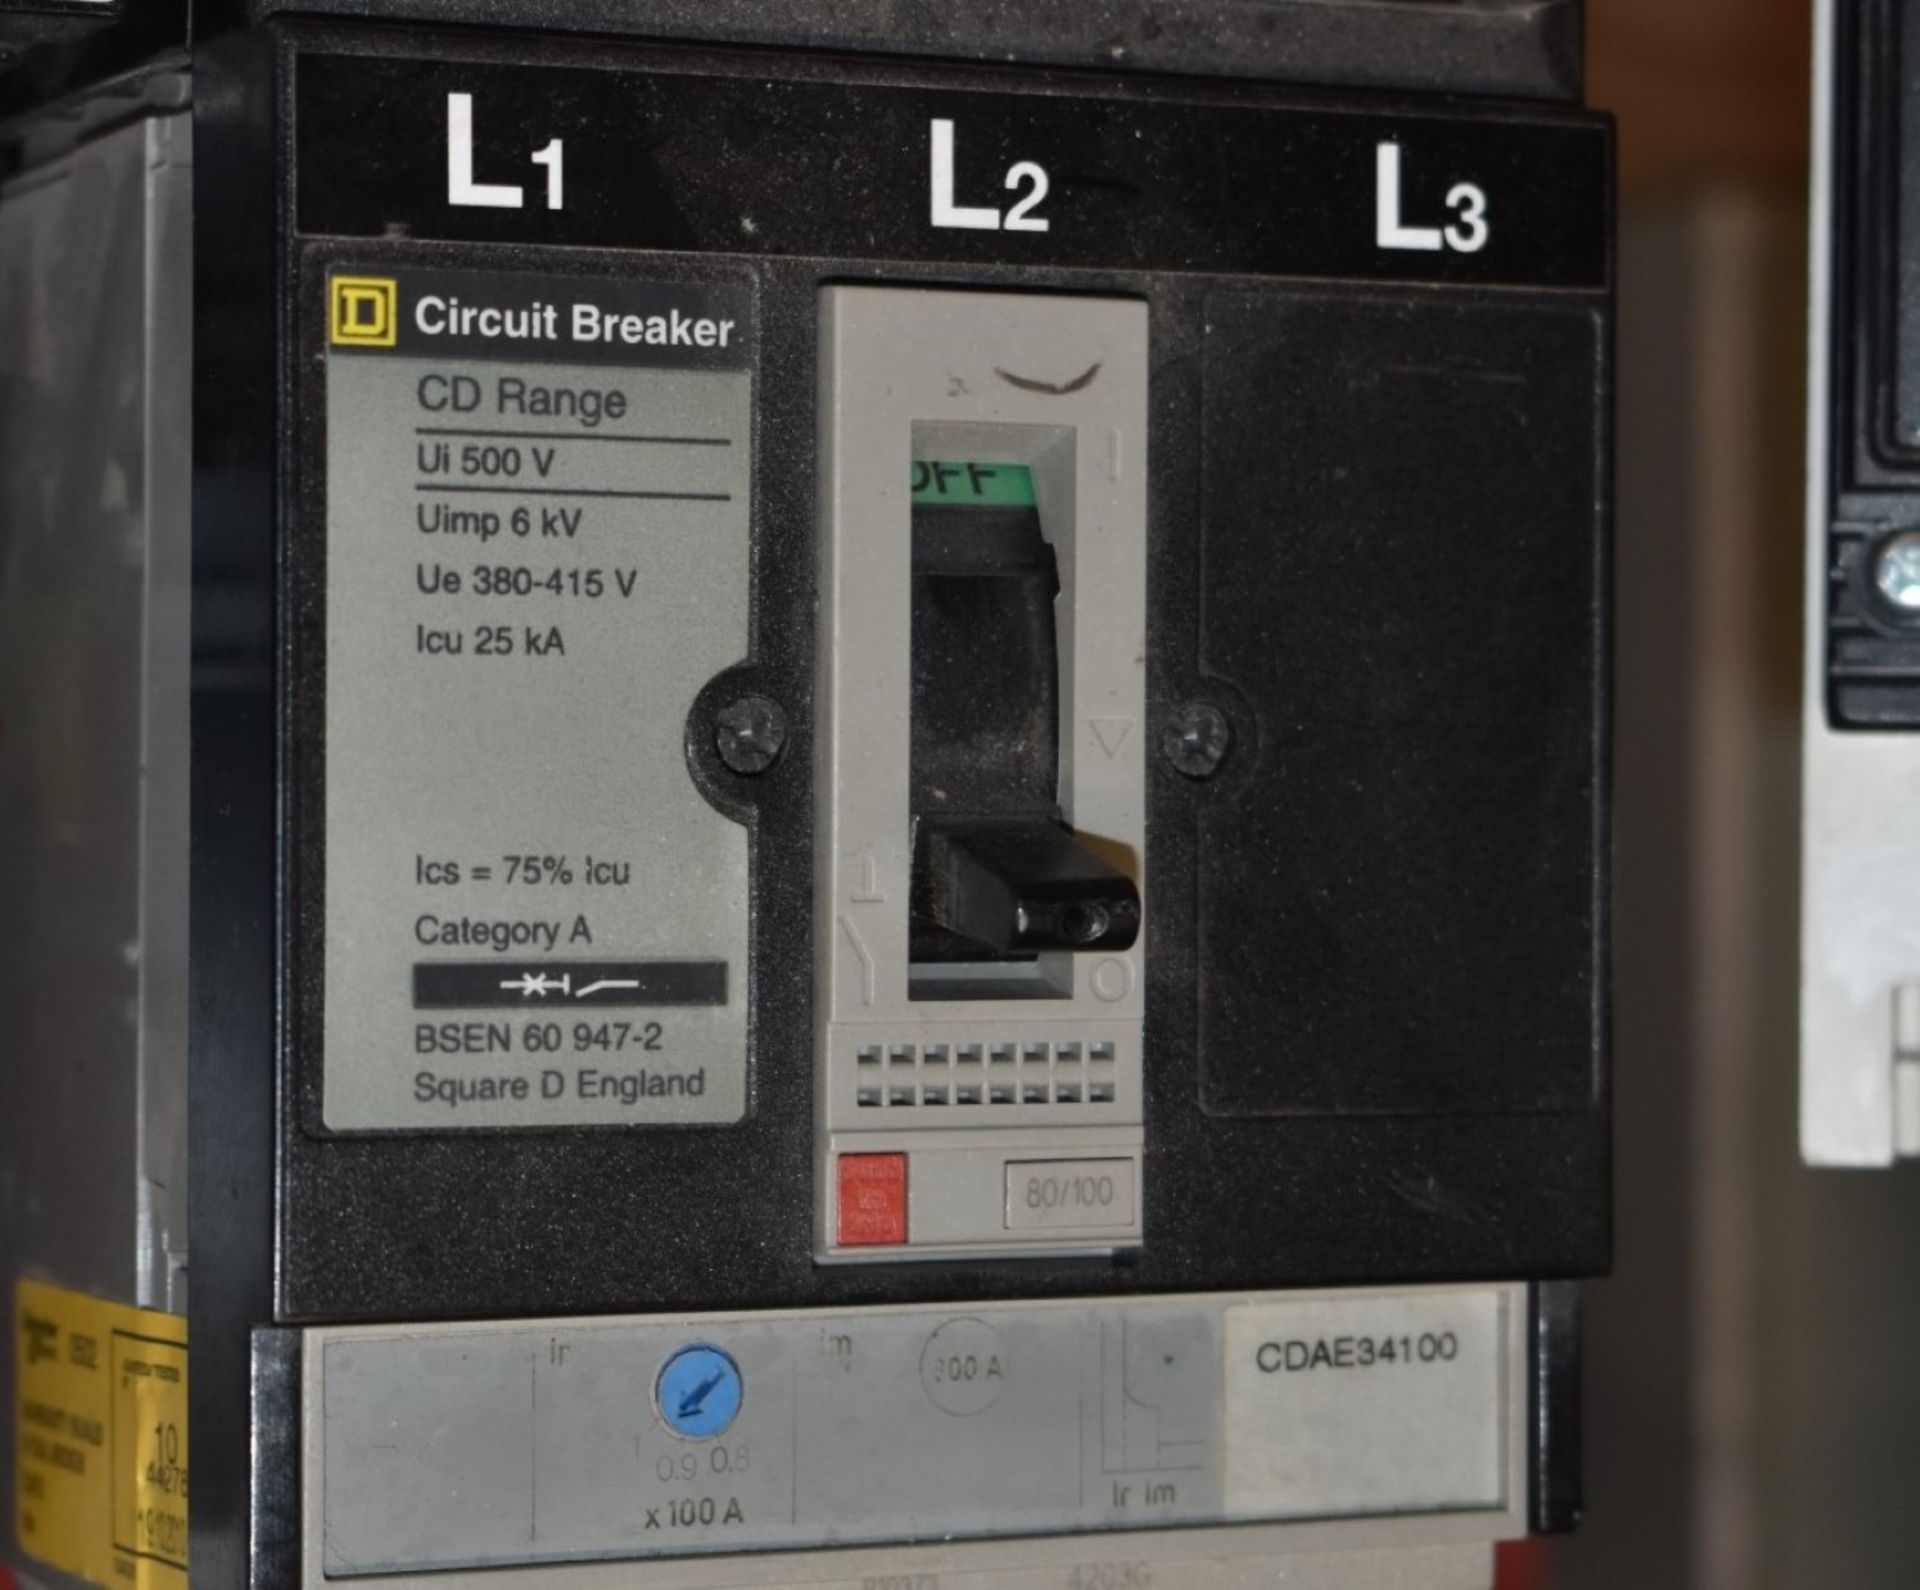 4 x Circuit Breakers By Crabtree Powerstar, Schneider Electric and Square D PME203 - Image 5 of 11